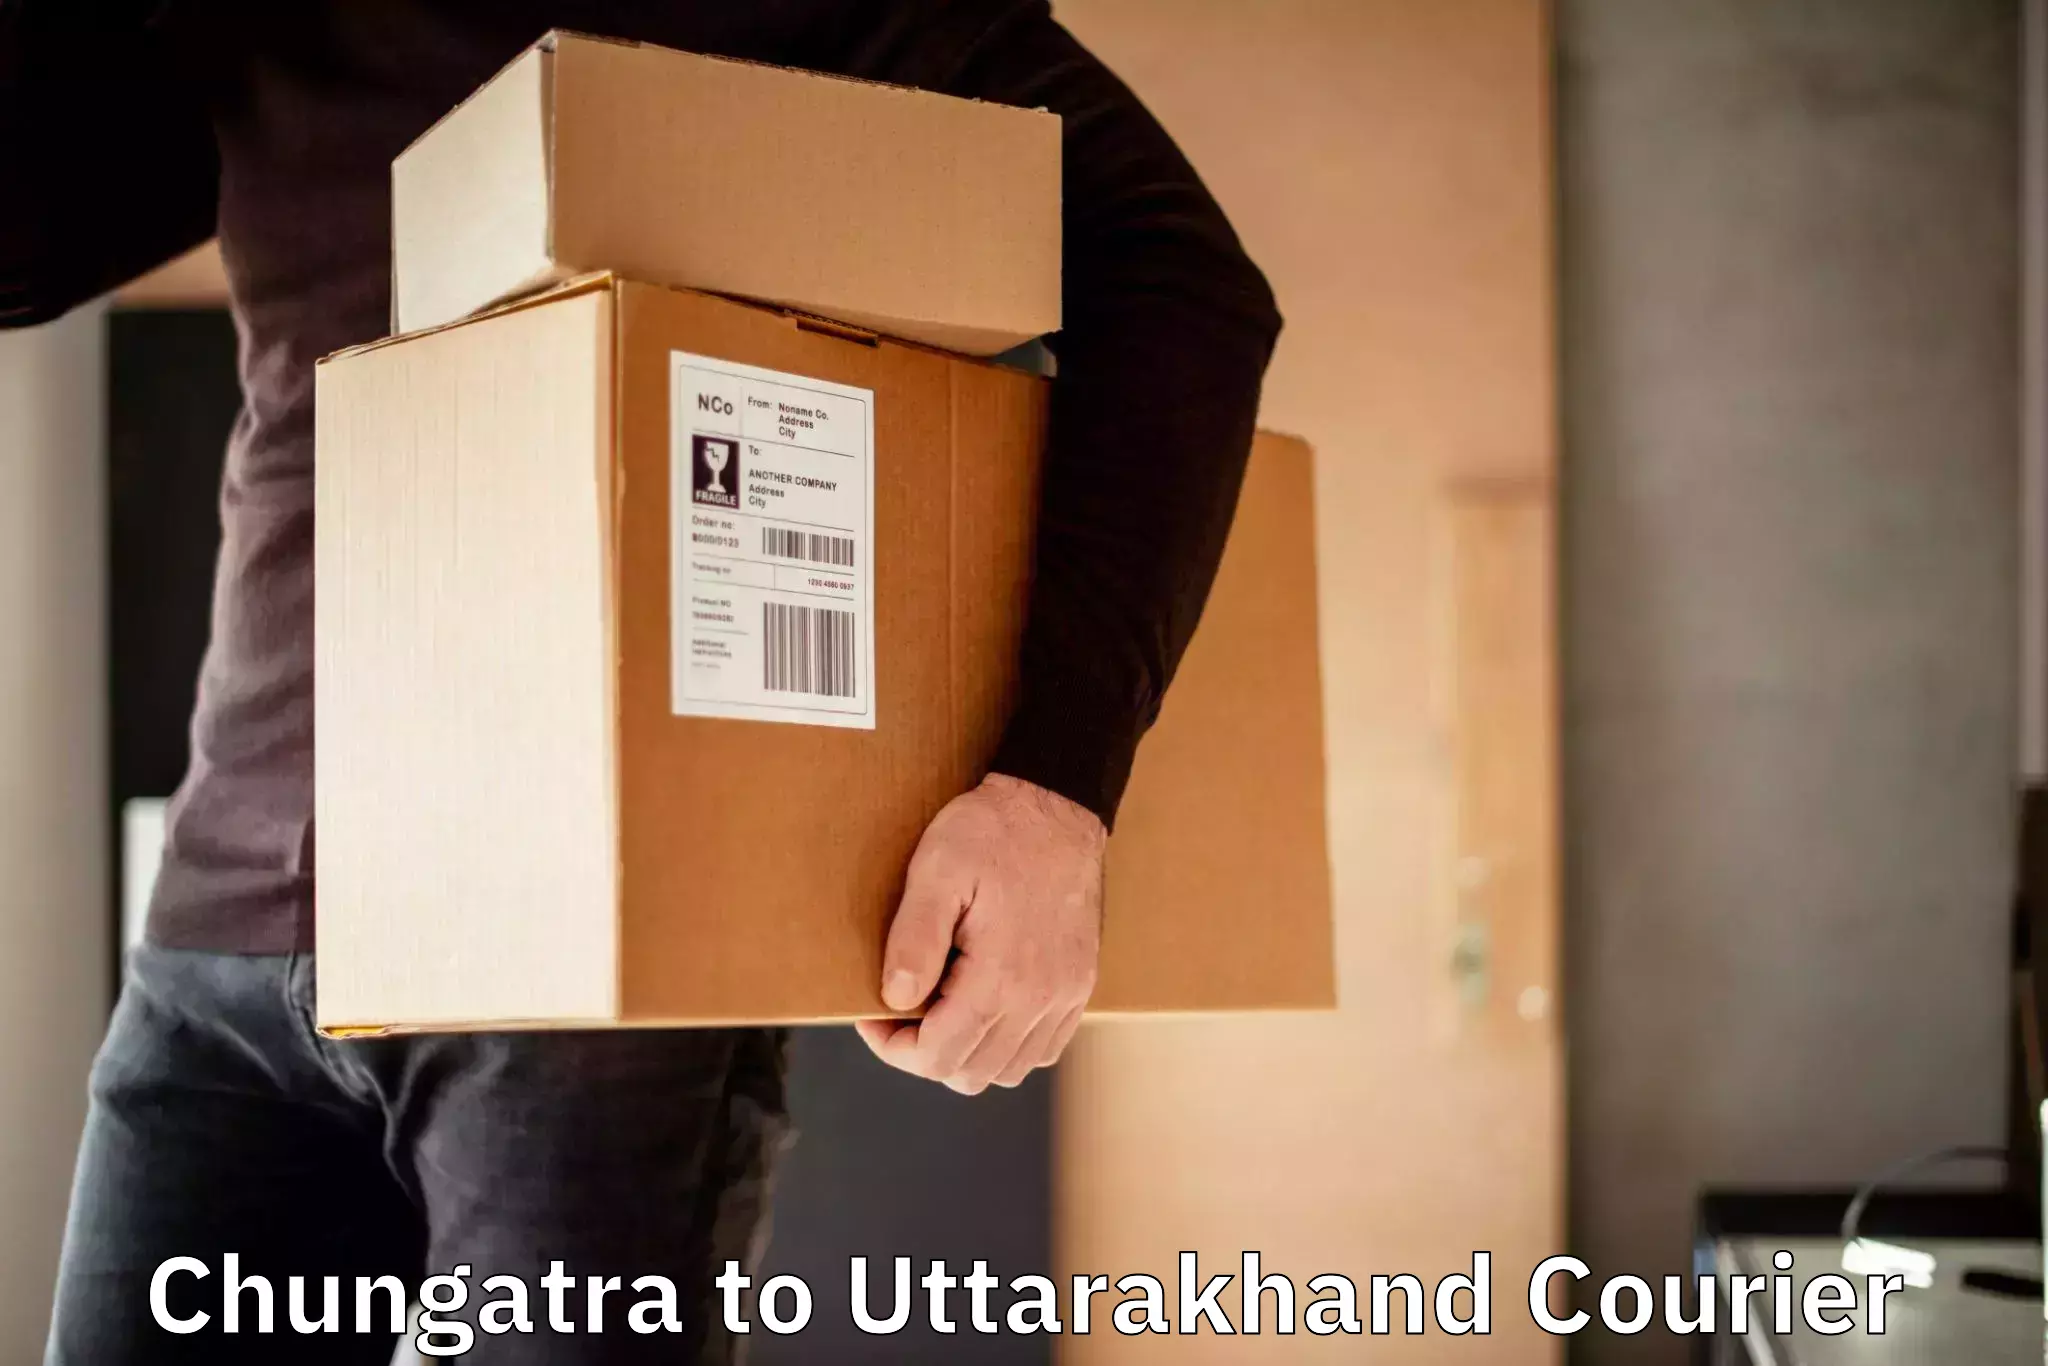 Affordable international shipping Chungatra to Roorkee